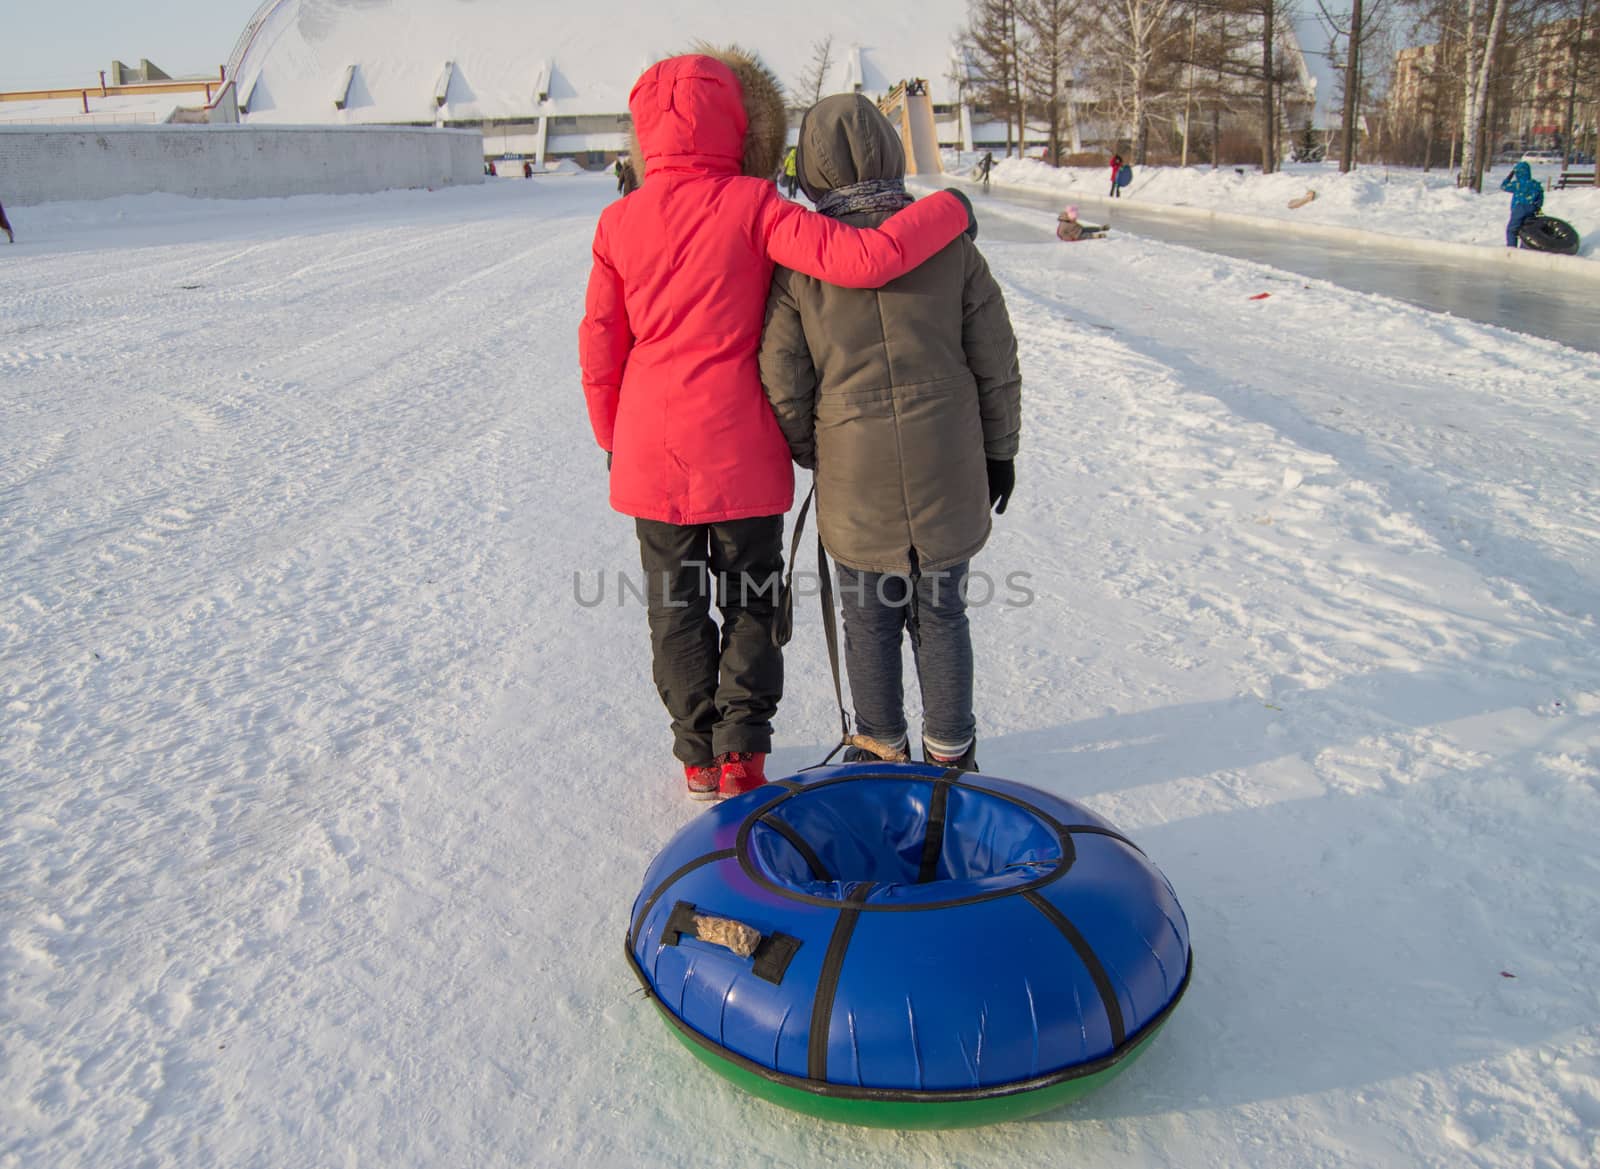 Two teen girls pull tubing after after sliding down the slope of an ice slide, winter fun in the Park.